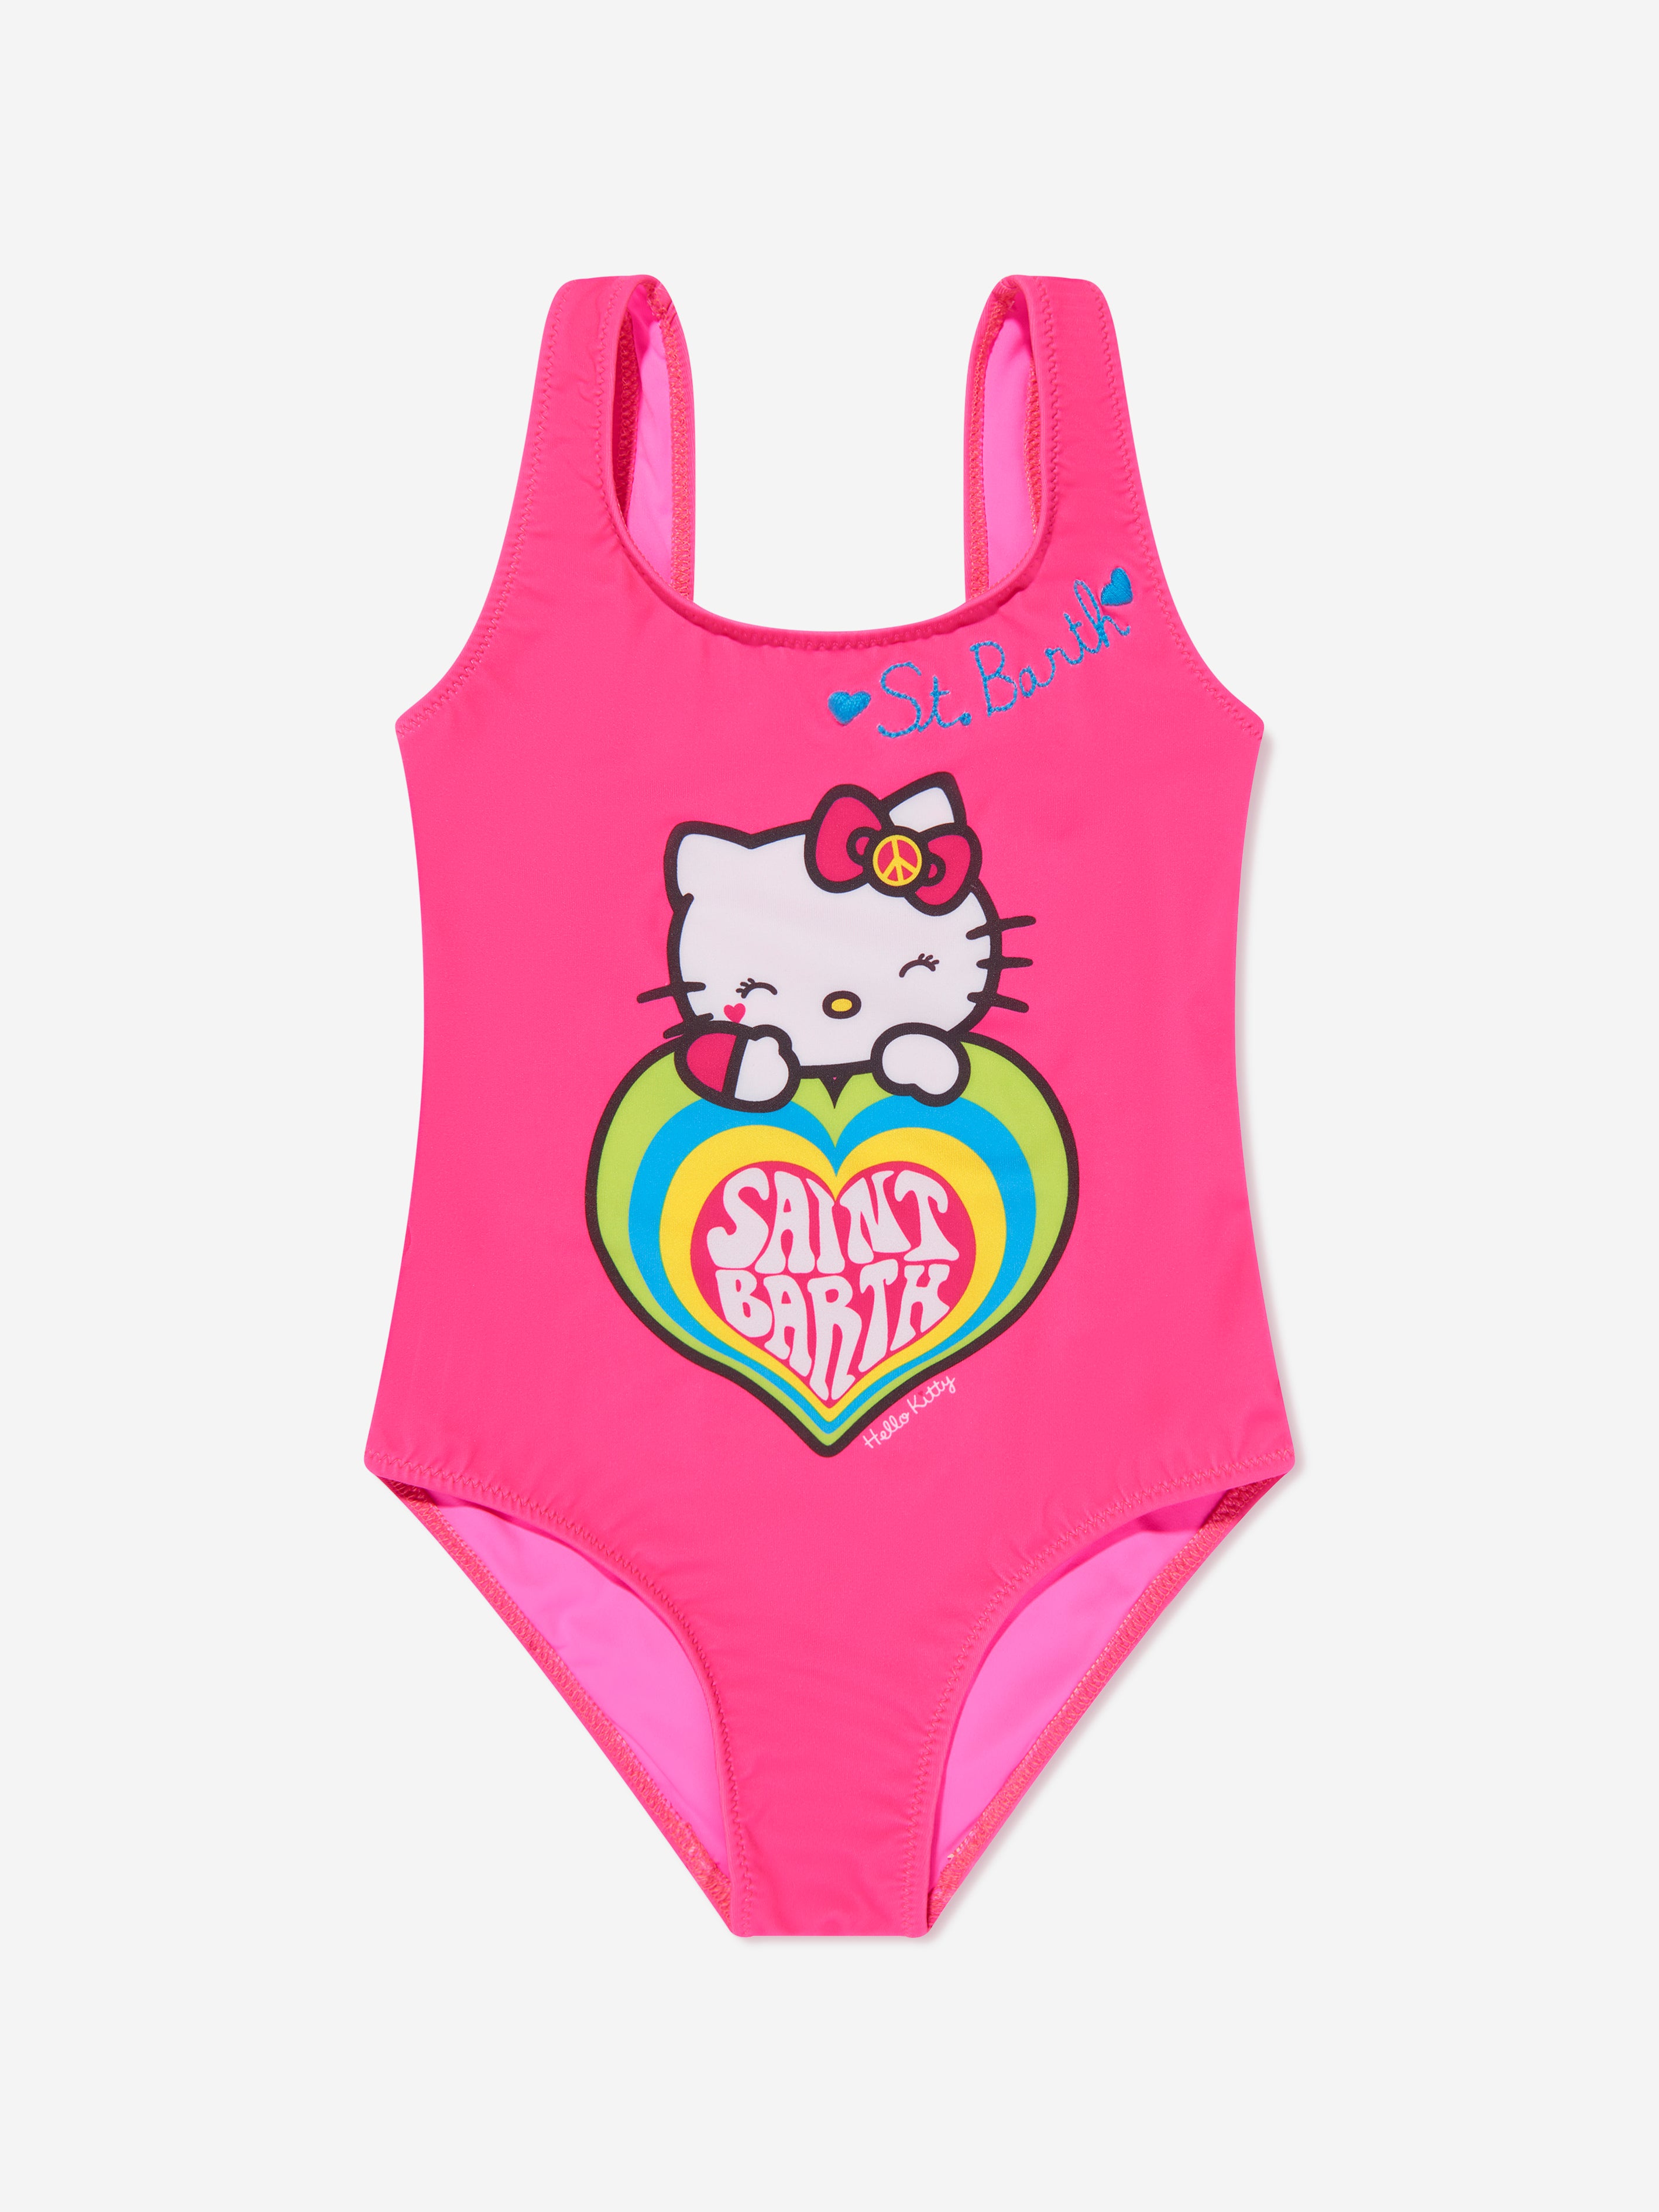 Girl's HELLO KITTY by Sanrio Swimsuit Bathing Suit Tie Dye 7/8 NWT Top ONLY